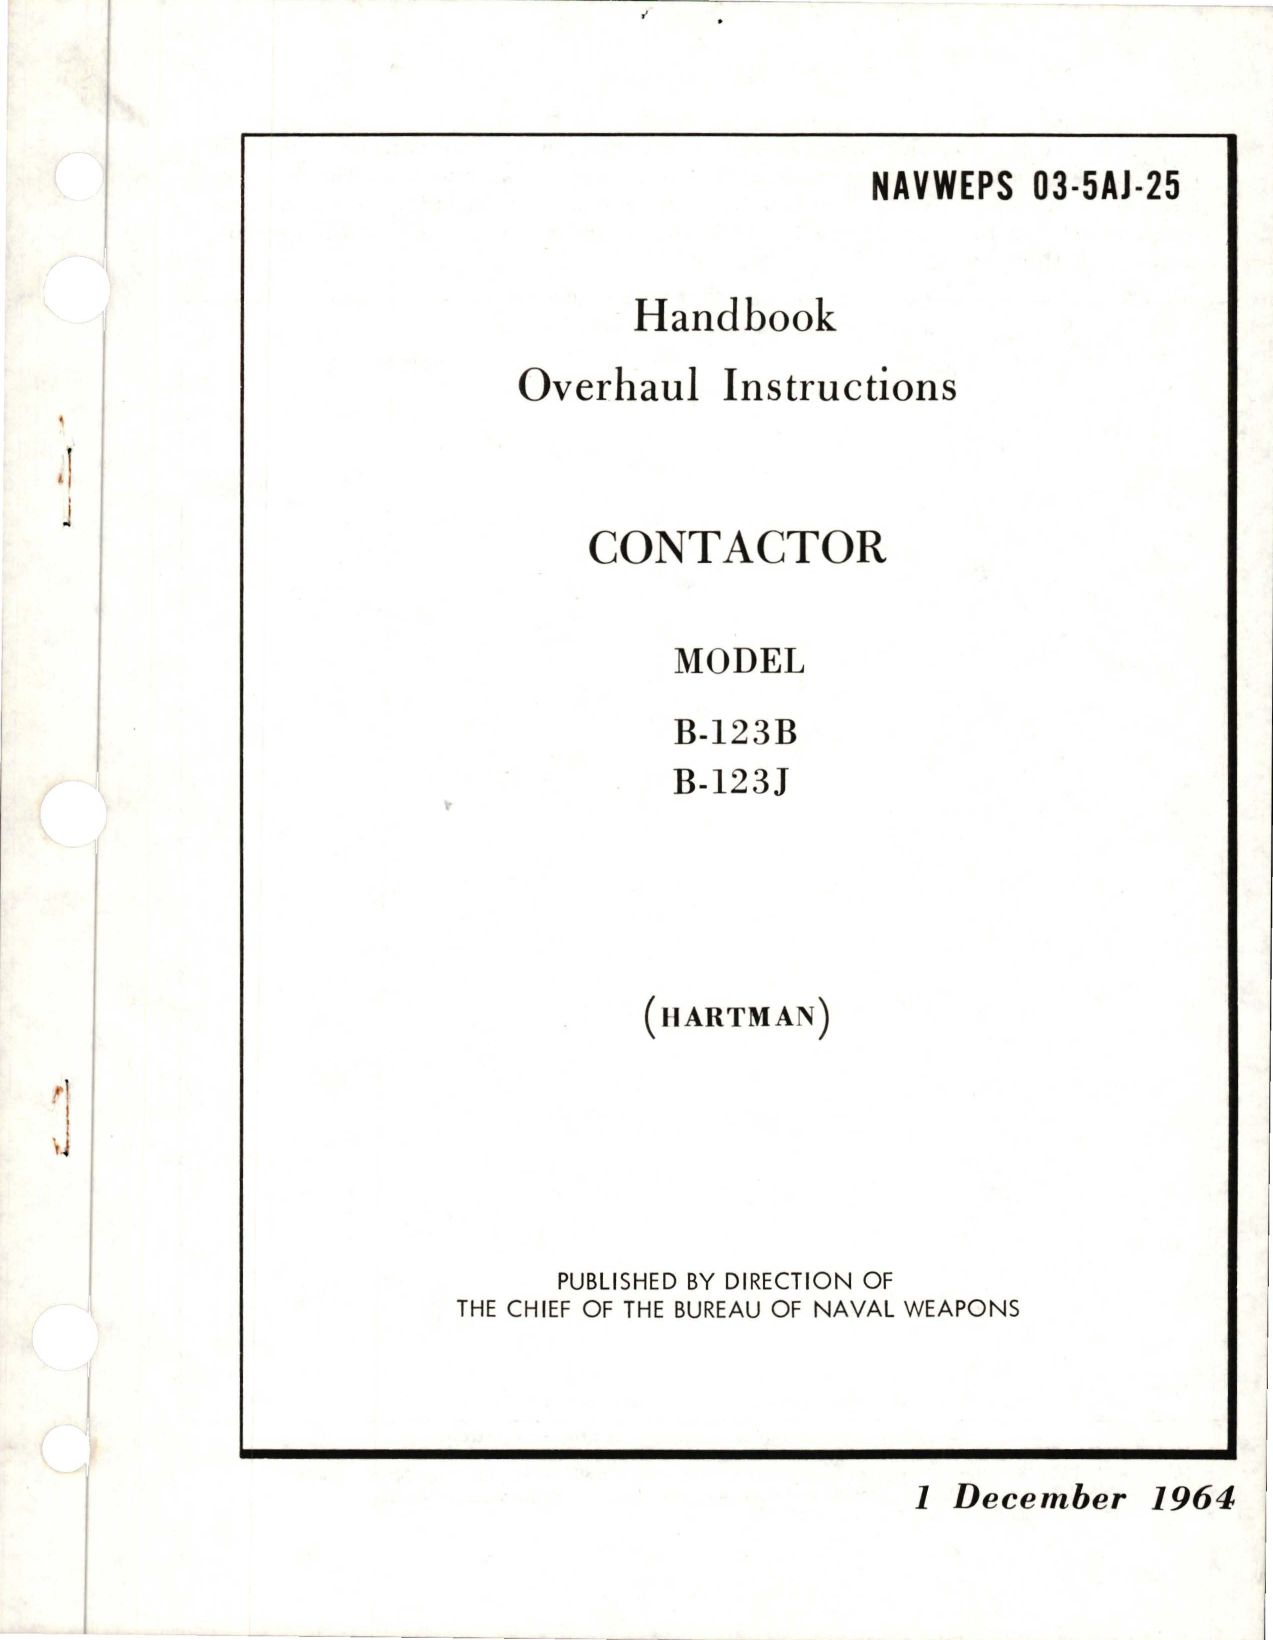 Sample page 1 from AirCorps Library document: Overhaul Instructions for Contactor - Model B-123B and B-123J